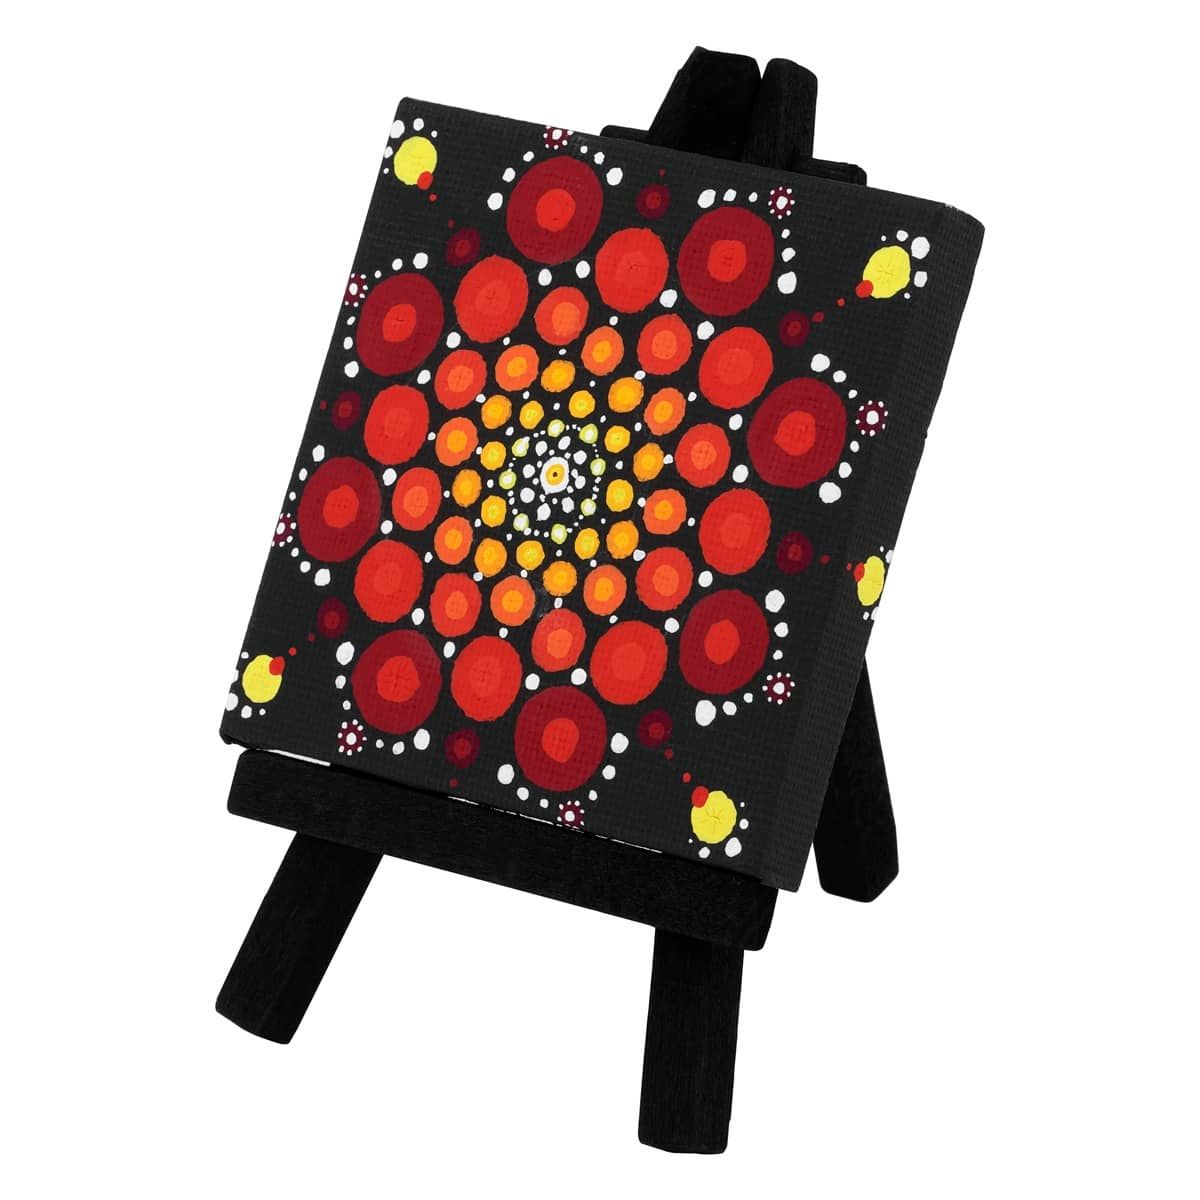 Artwork on Ultra Mini Canvas and Easels